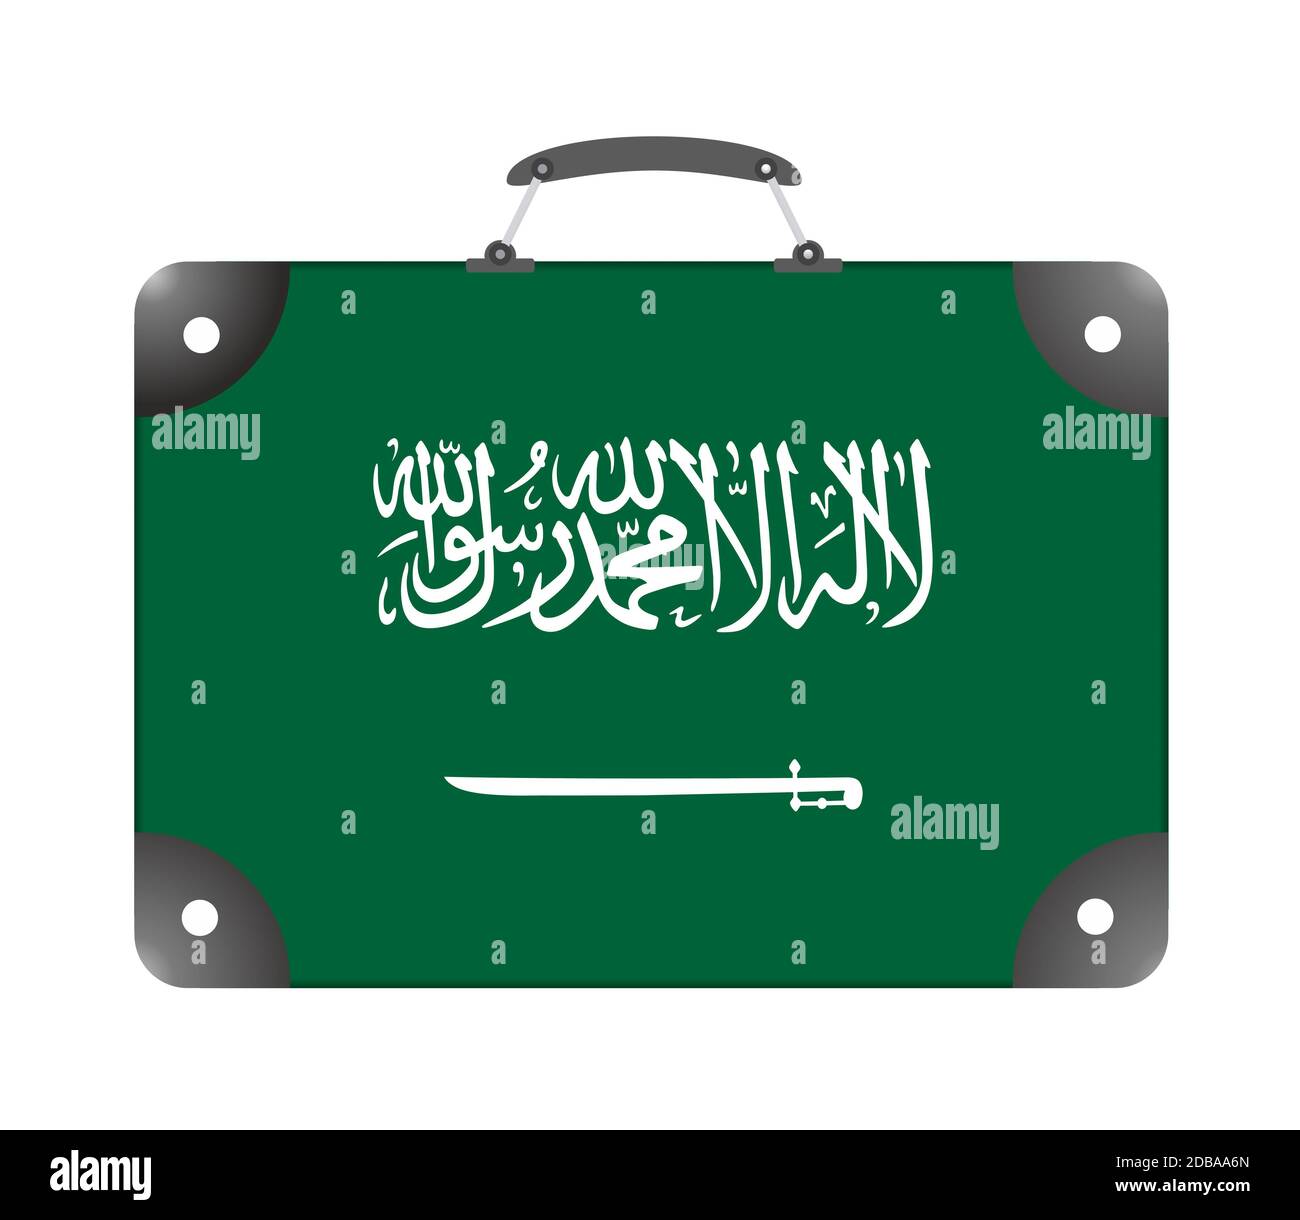 Saudi Arabia flag in the form of a travel suitcase on a white background - illustration Stock Photo